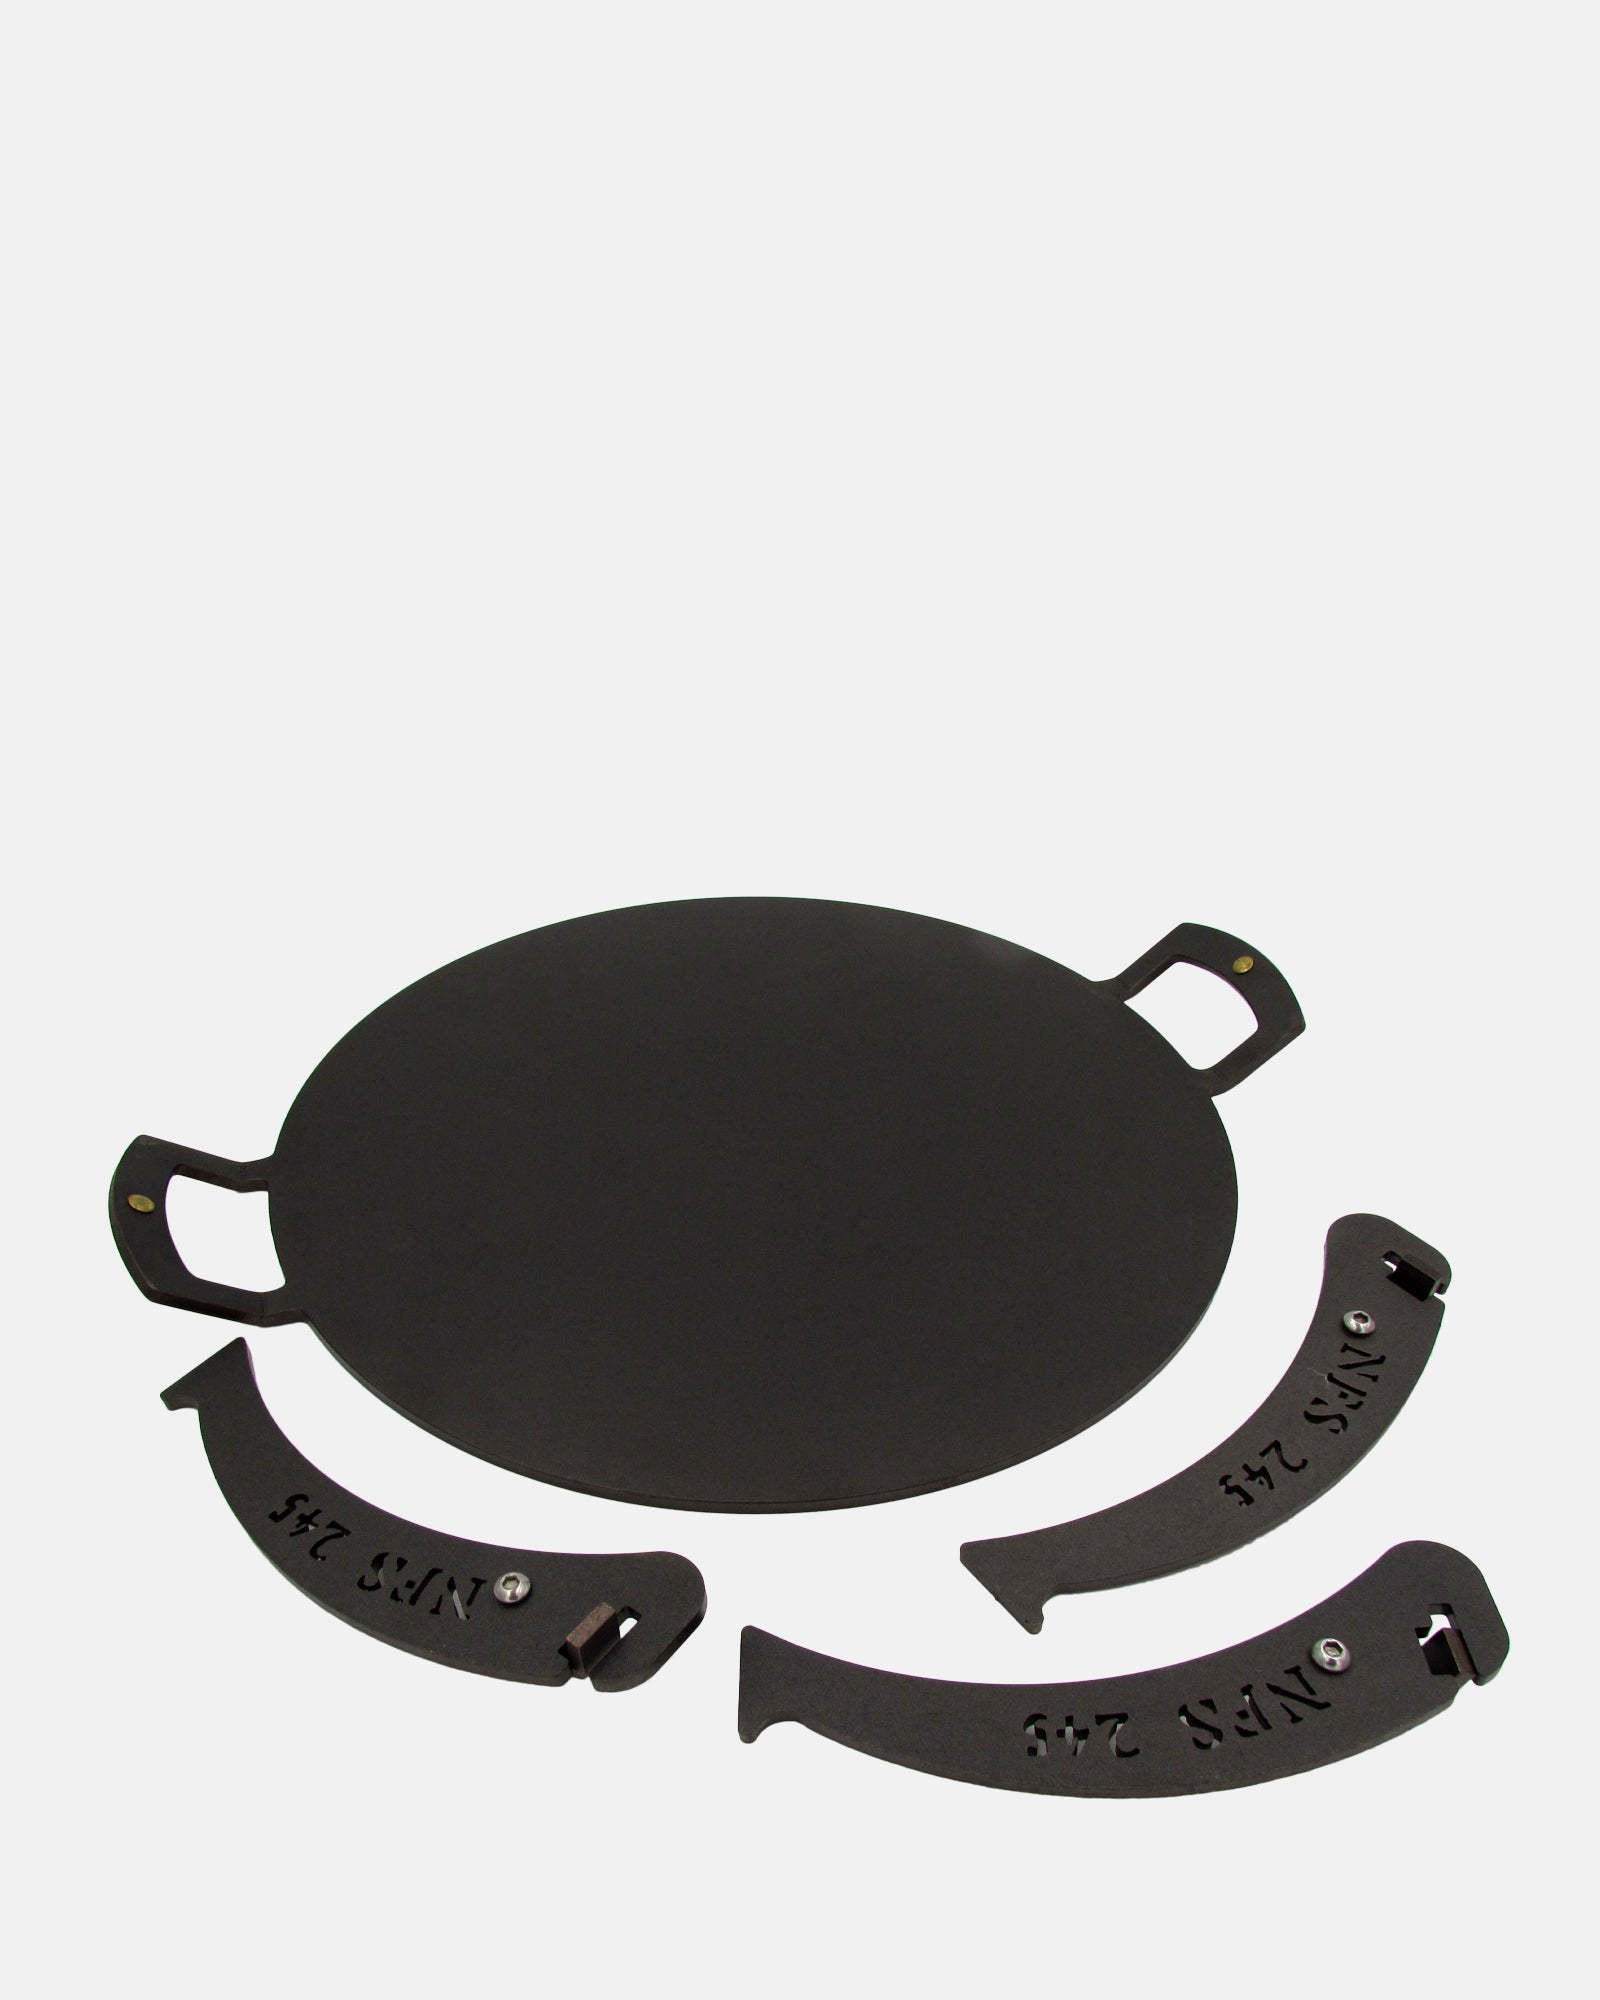 15 inch Black Iron Chapa Griddle Plate with Legs - BRIT LOCKER